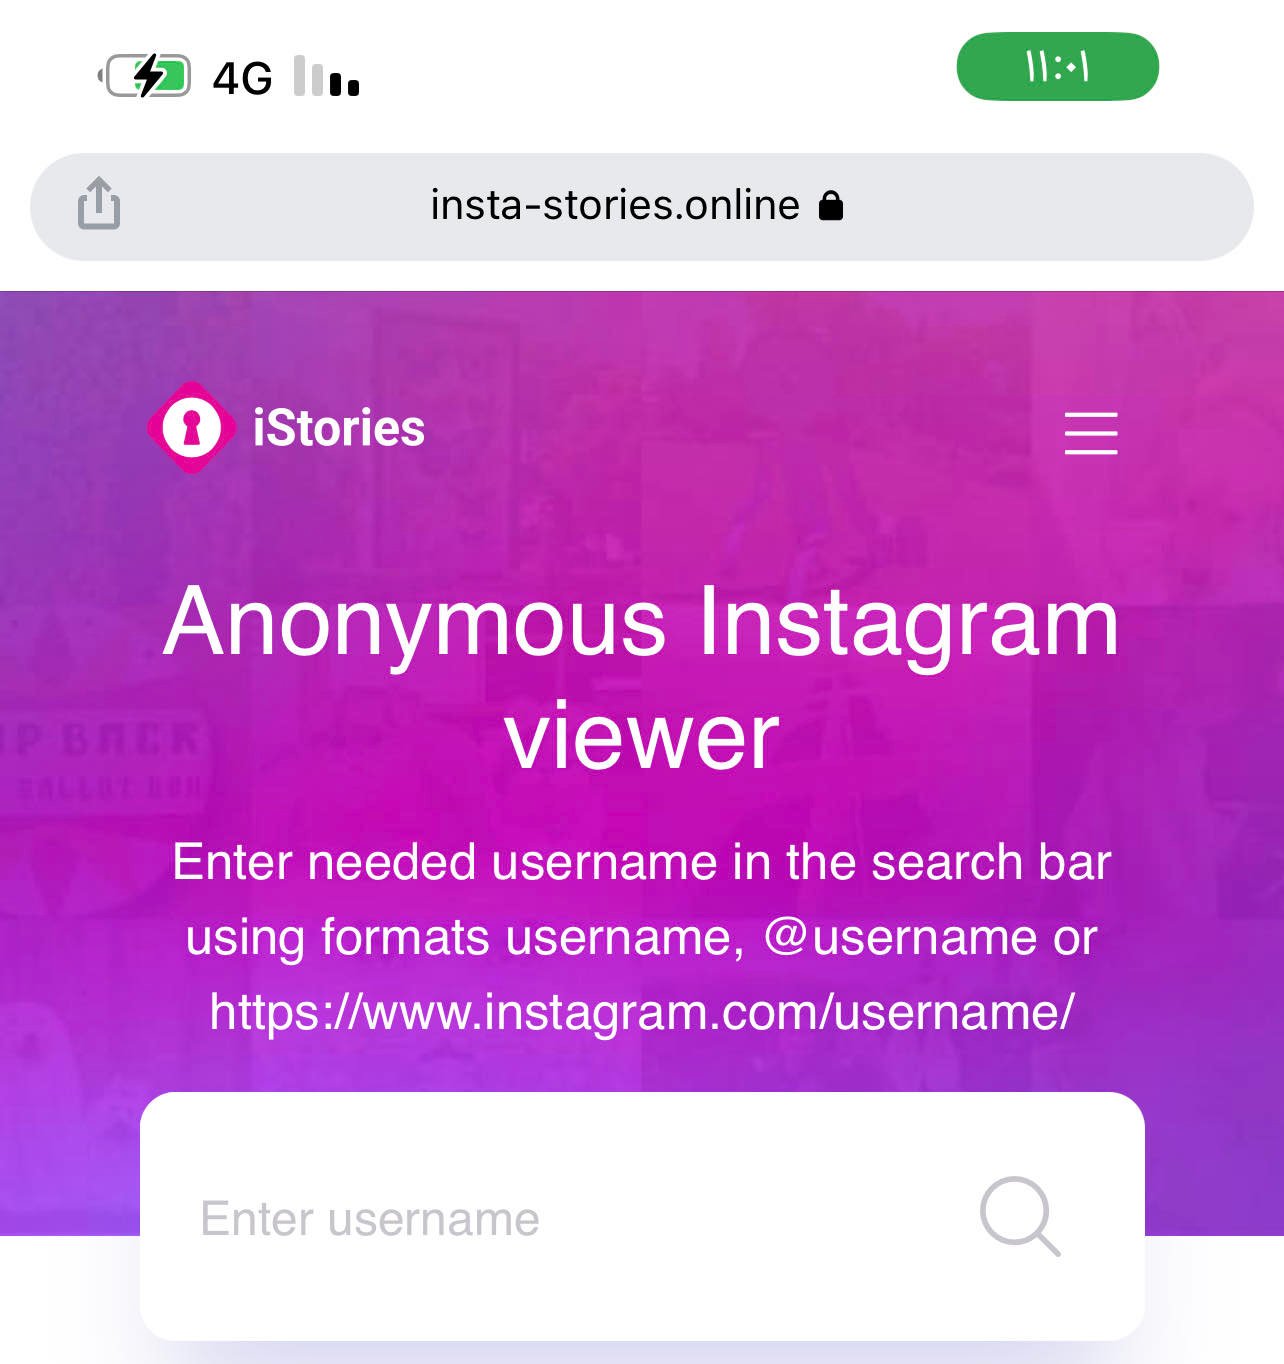 View Instagram Posts and Stories Without an Account 10